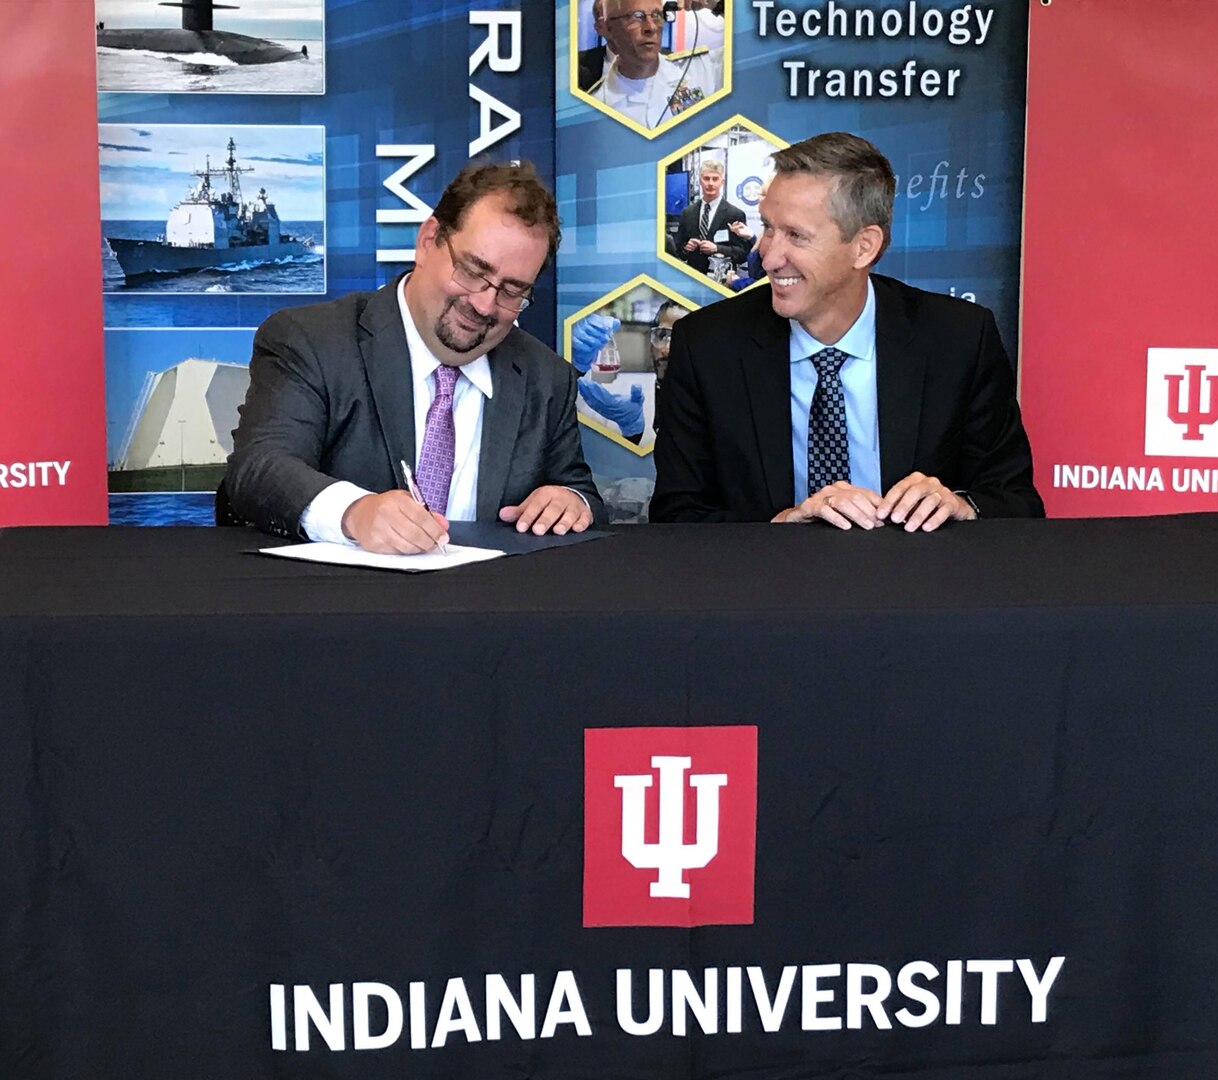 Indiana University's CACR Director Mr. Von Welch and NSWC Crane Technical Director Dr. Brett Seidle re-signed a CRADA agreement on Sept. 13, 2018. The goal is to grow the collaboration between IU and NSWC Crane to improve capabilities in the areas of software assurance and trusted artificial intelligence.